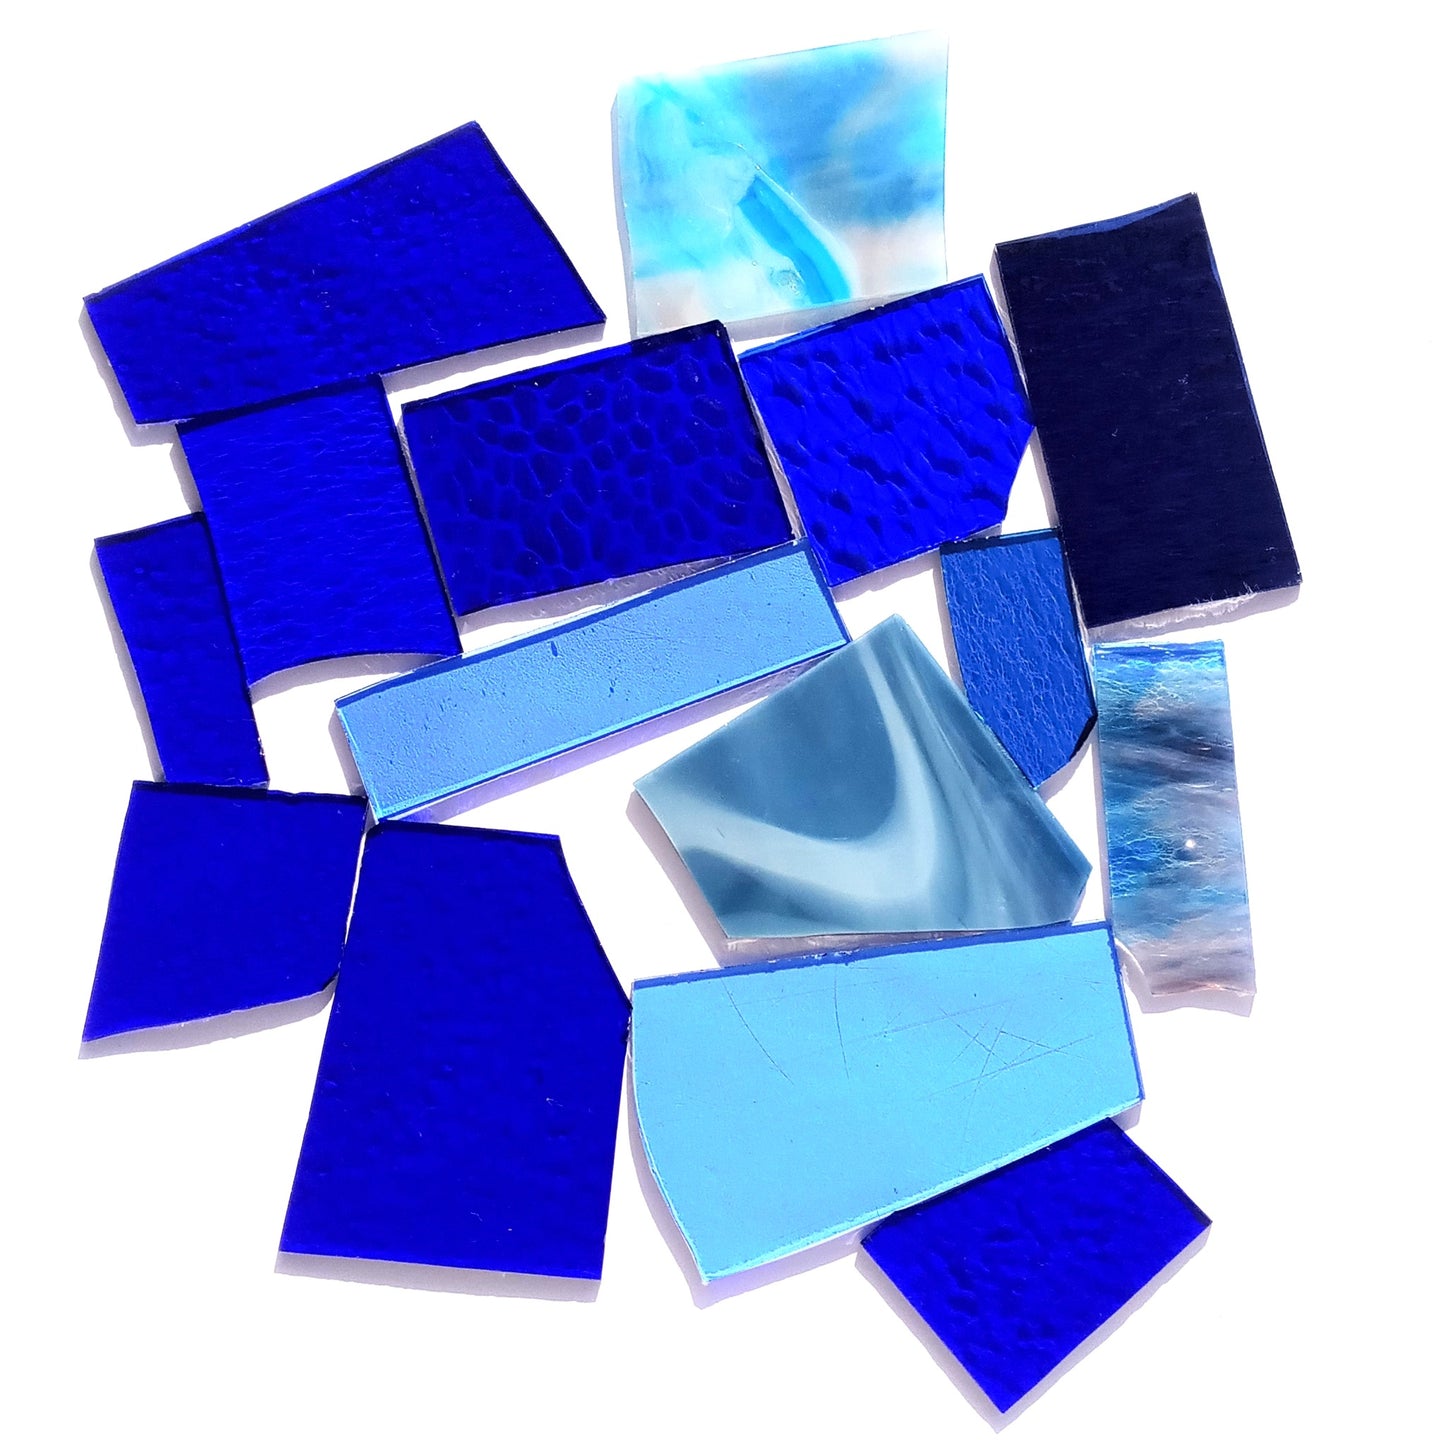 Blue Stained Glass Scraps, Curated 1 lb Package of Reclaimed Shop Scrap Glass in Shades of Blue